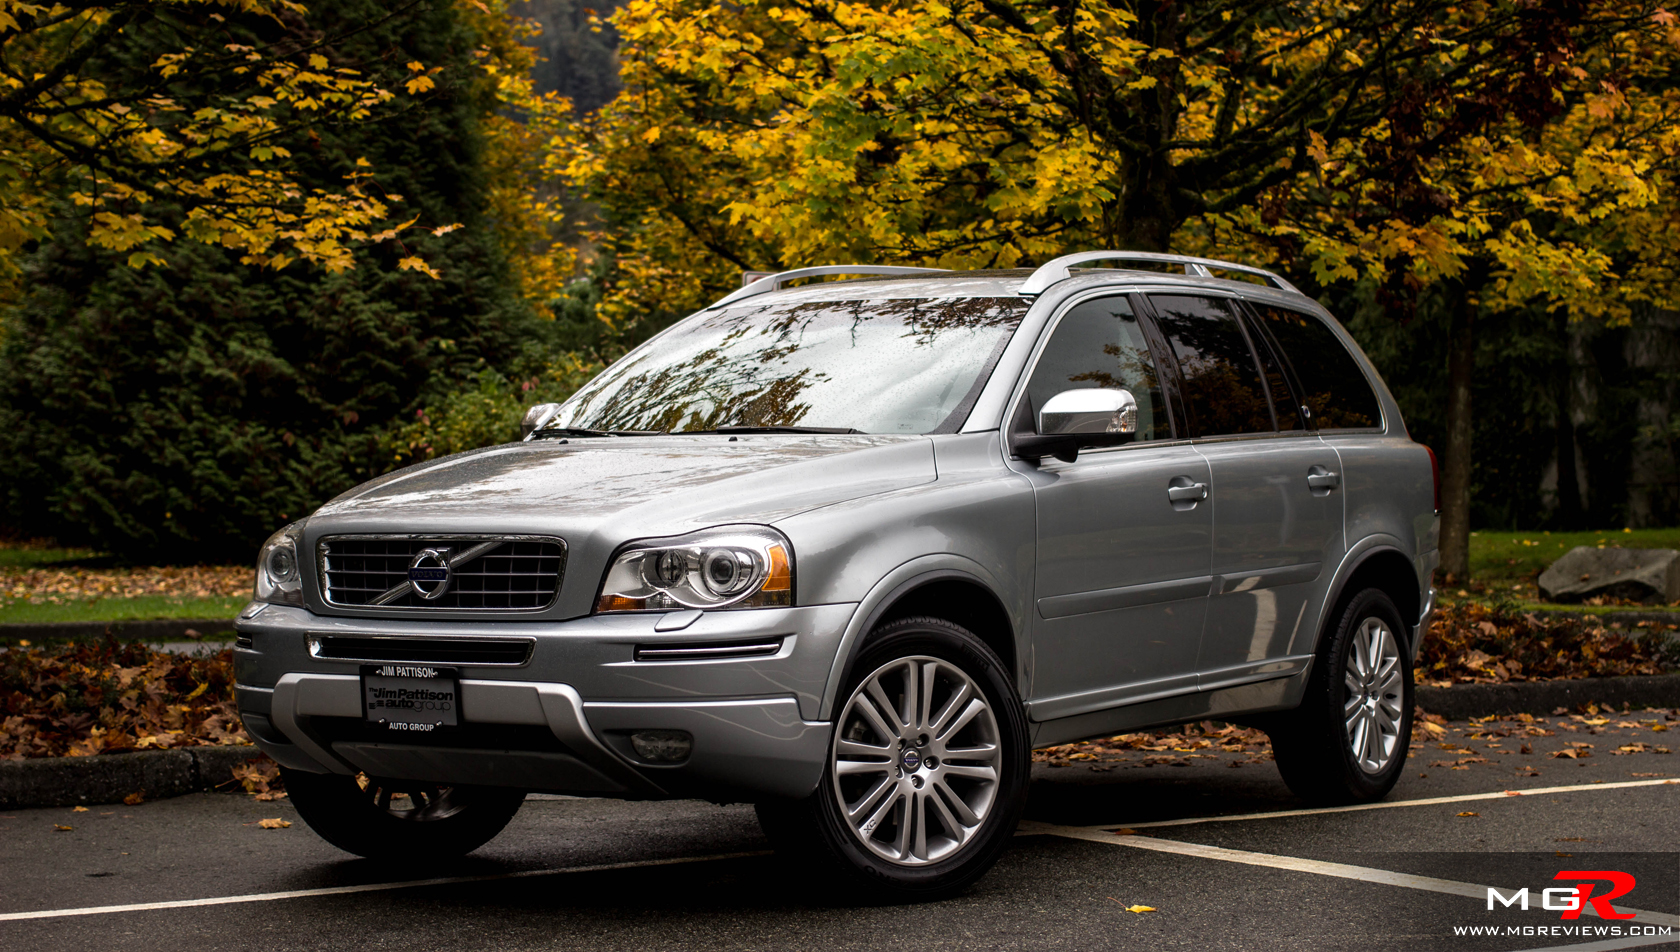 Review: 2014 Volvo XC90 - M.G.Reviews